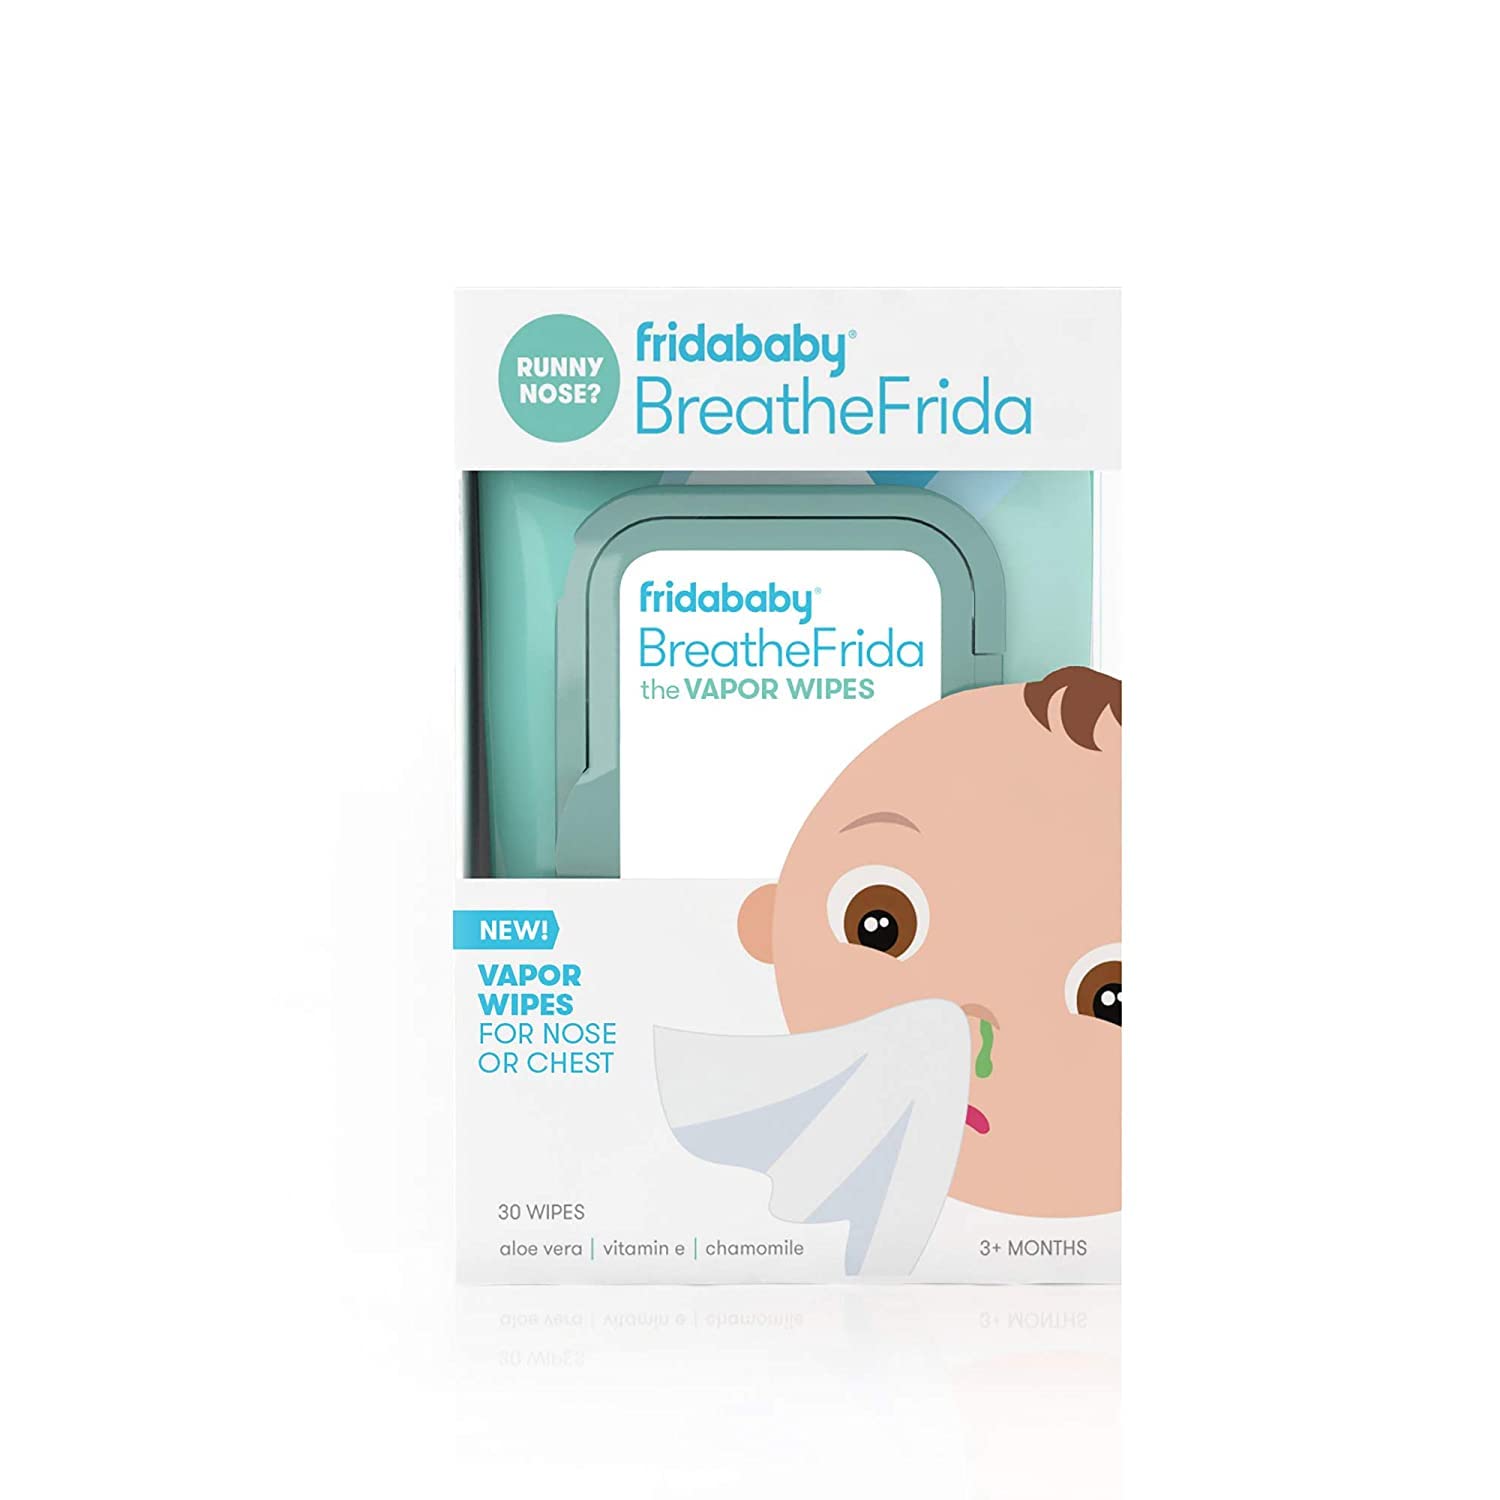 Breathefrida Vapor Wipes for Nose or Chest by Frida Baby 30 Count (Pack of 1)